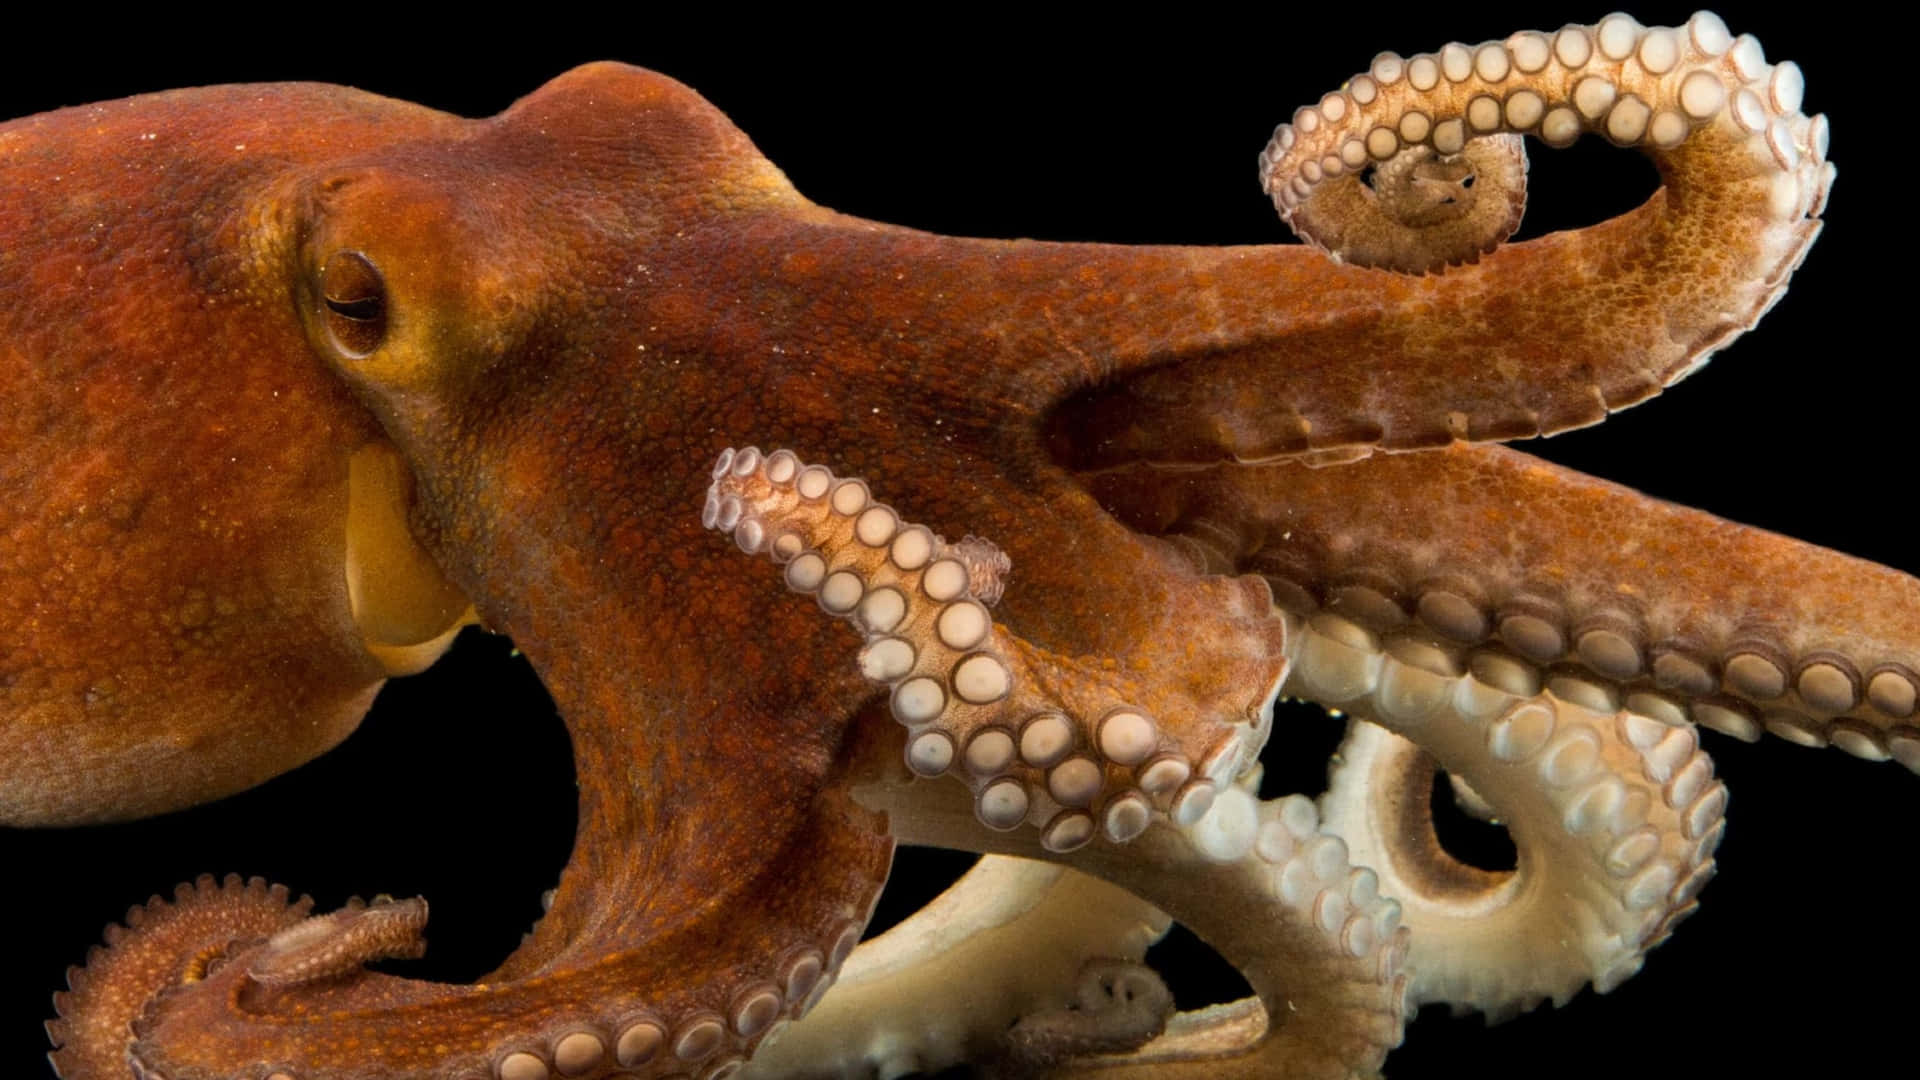 Explore the fascinating world of the Octopus